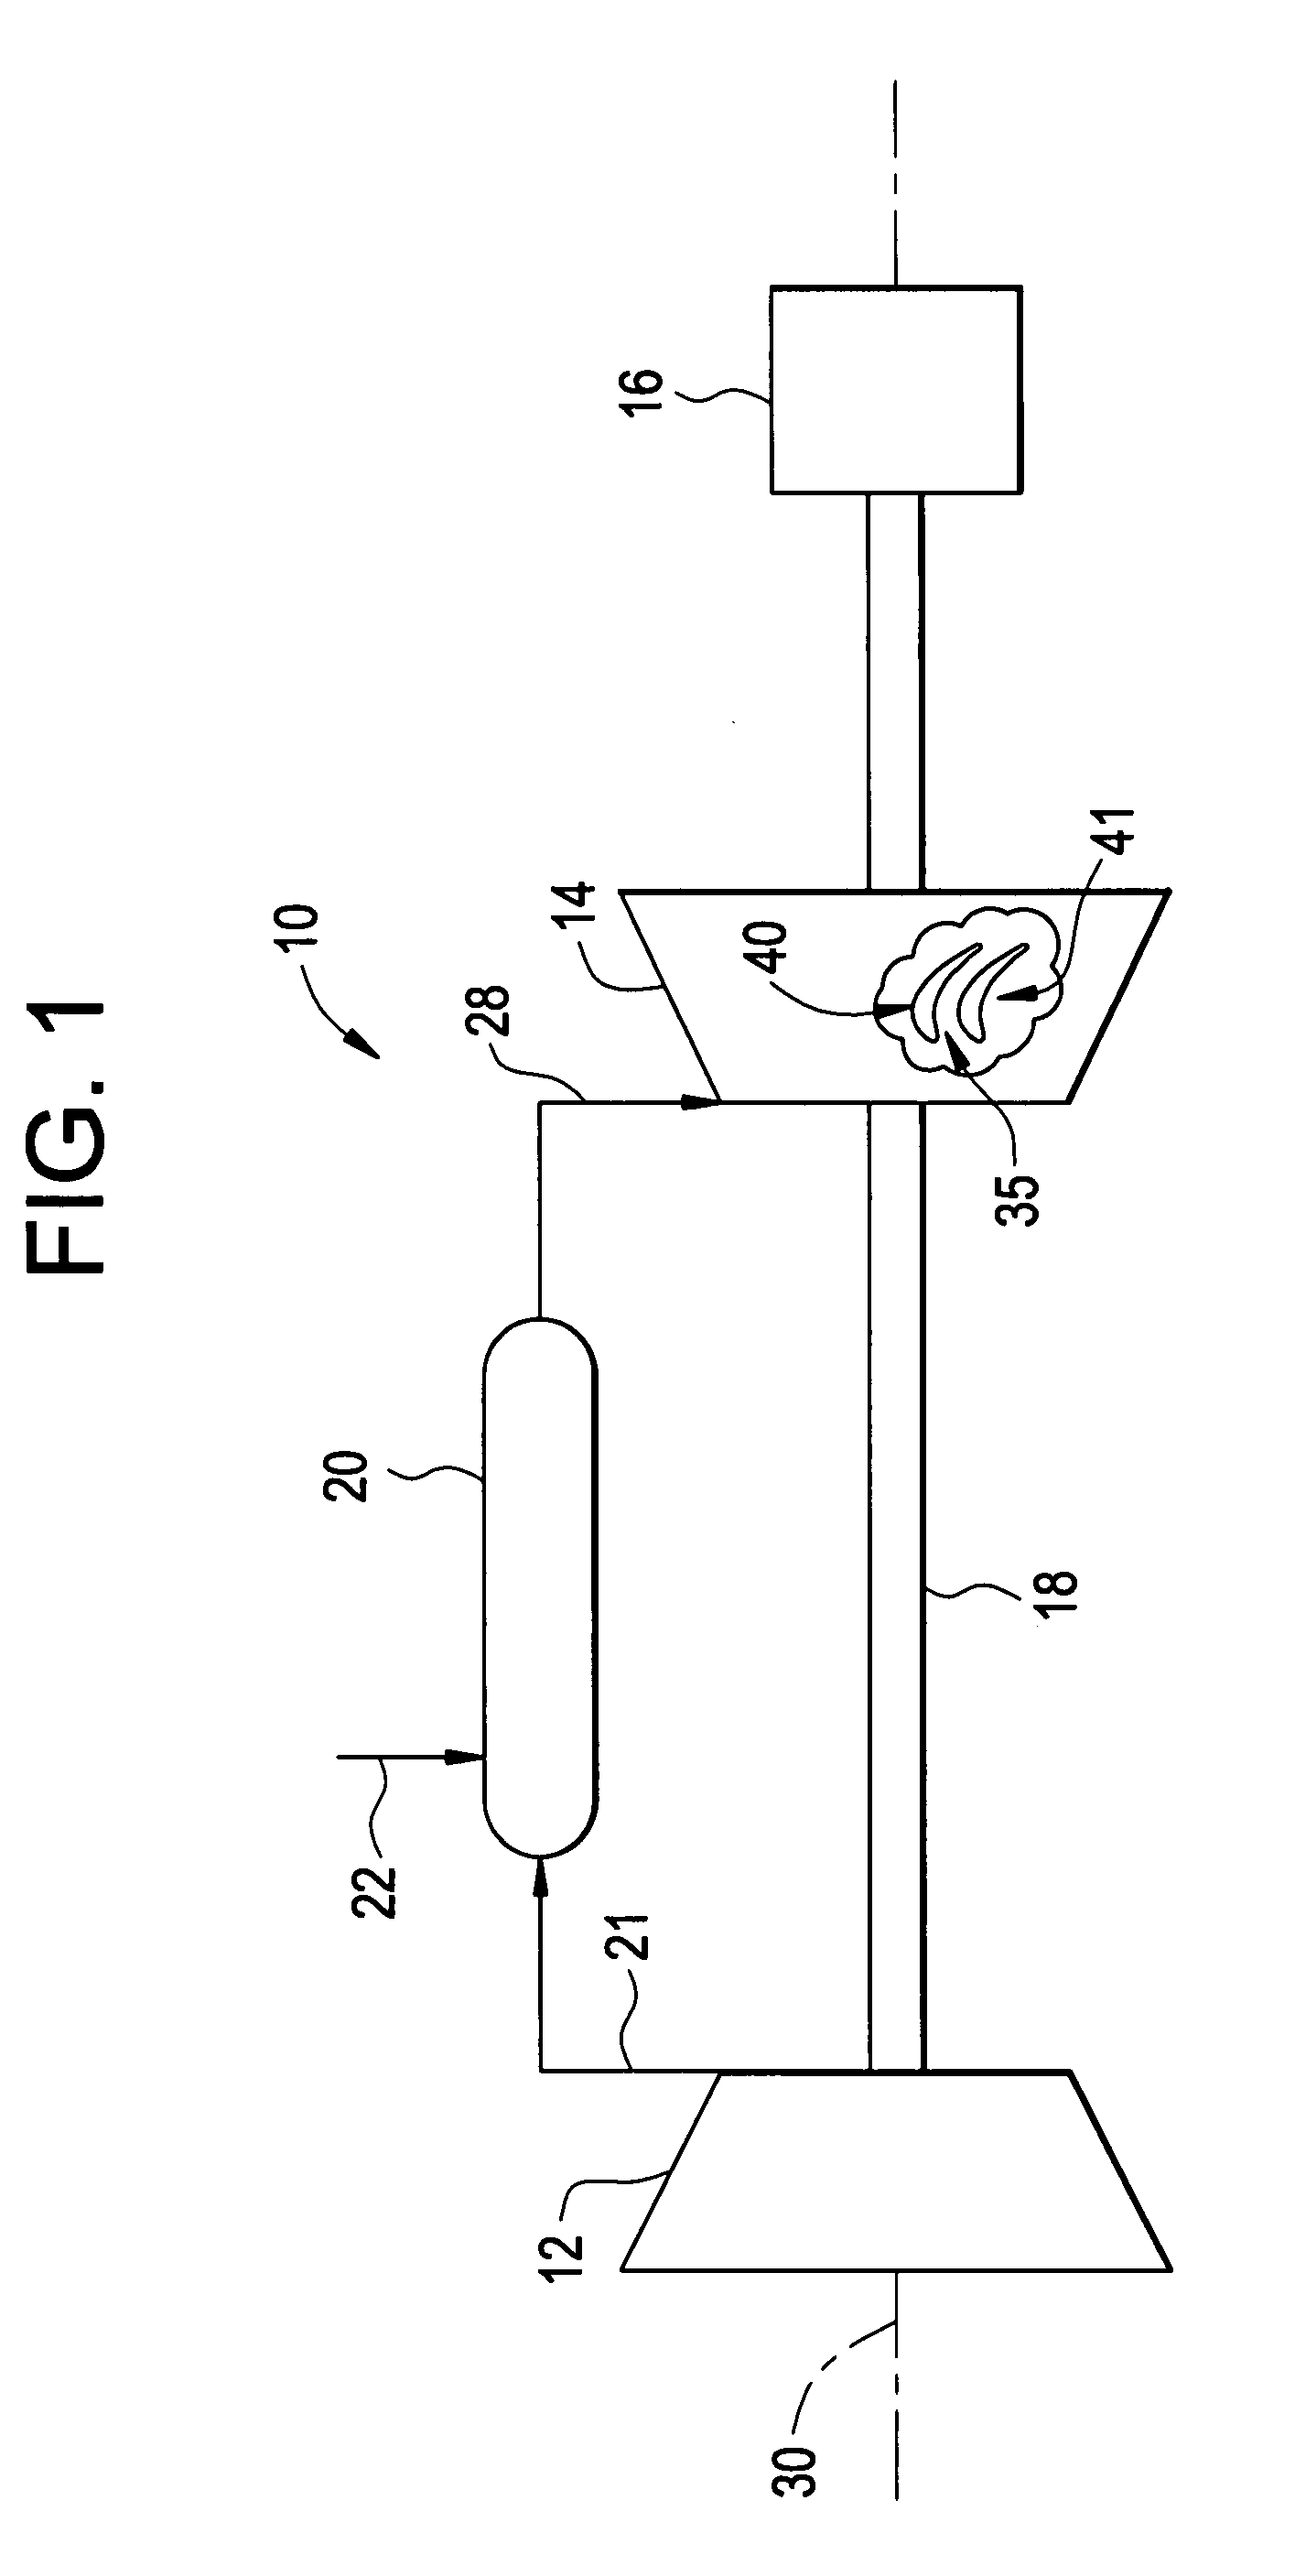 Multi-part cast turbine engine component having an internal cooling channel and method of forming a multi-part cast turbine engine component